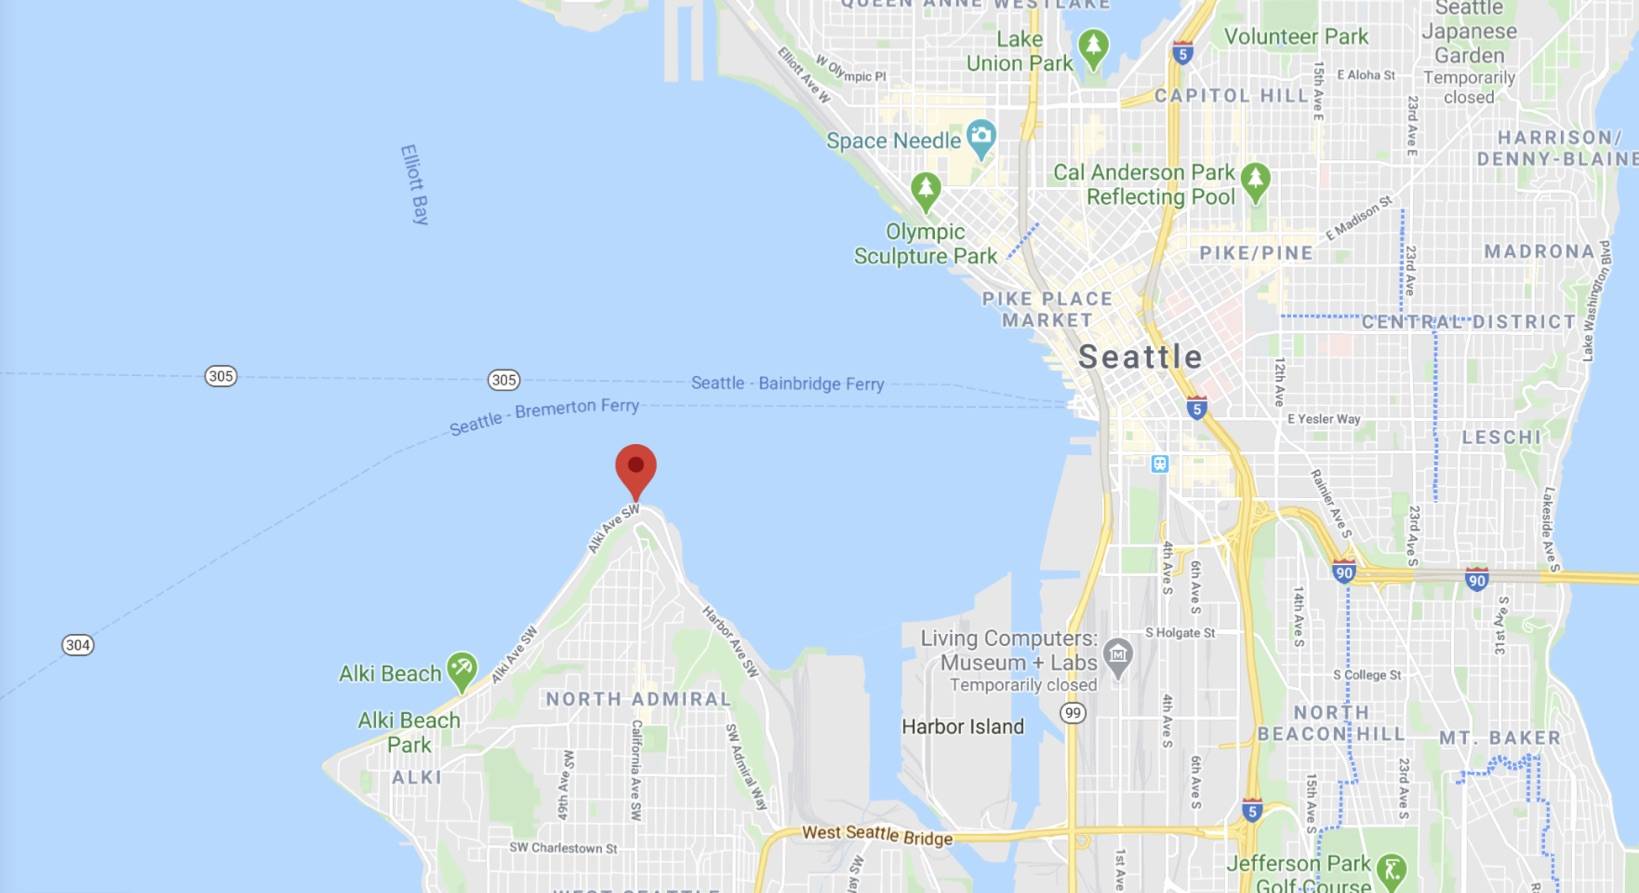 Human remains were found in a suitcase along Duwamish Head in West Seattle on June 19.